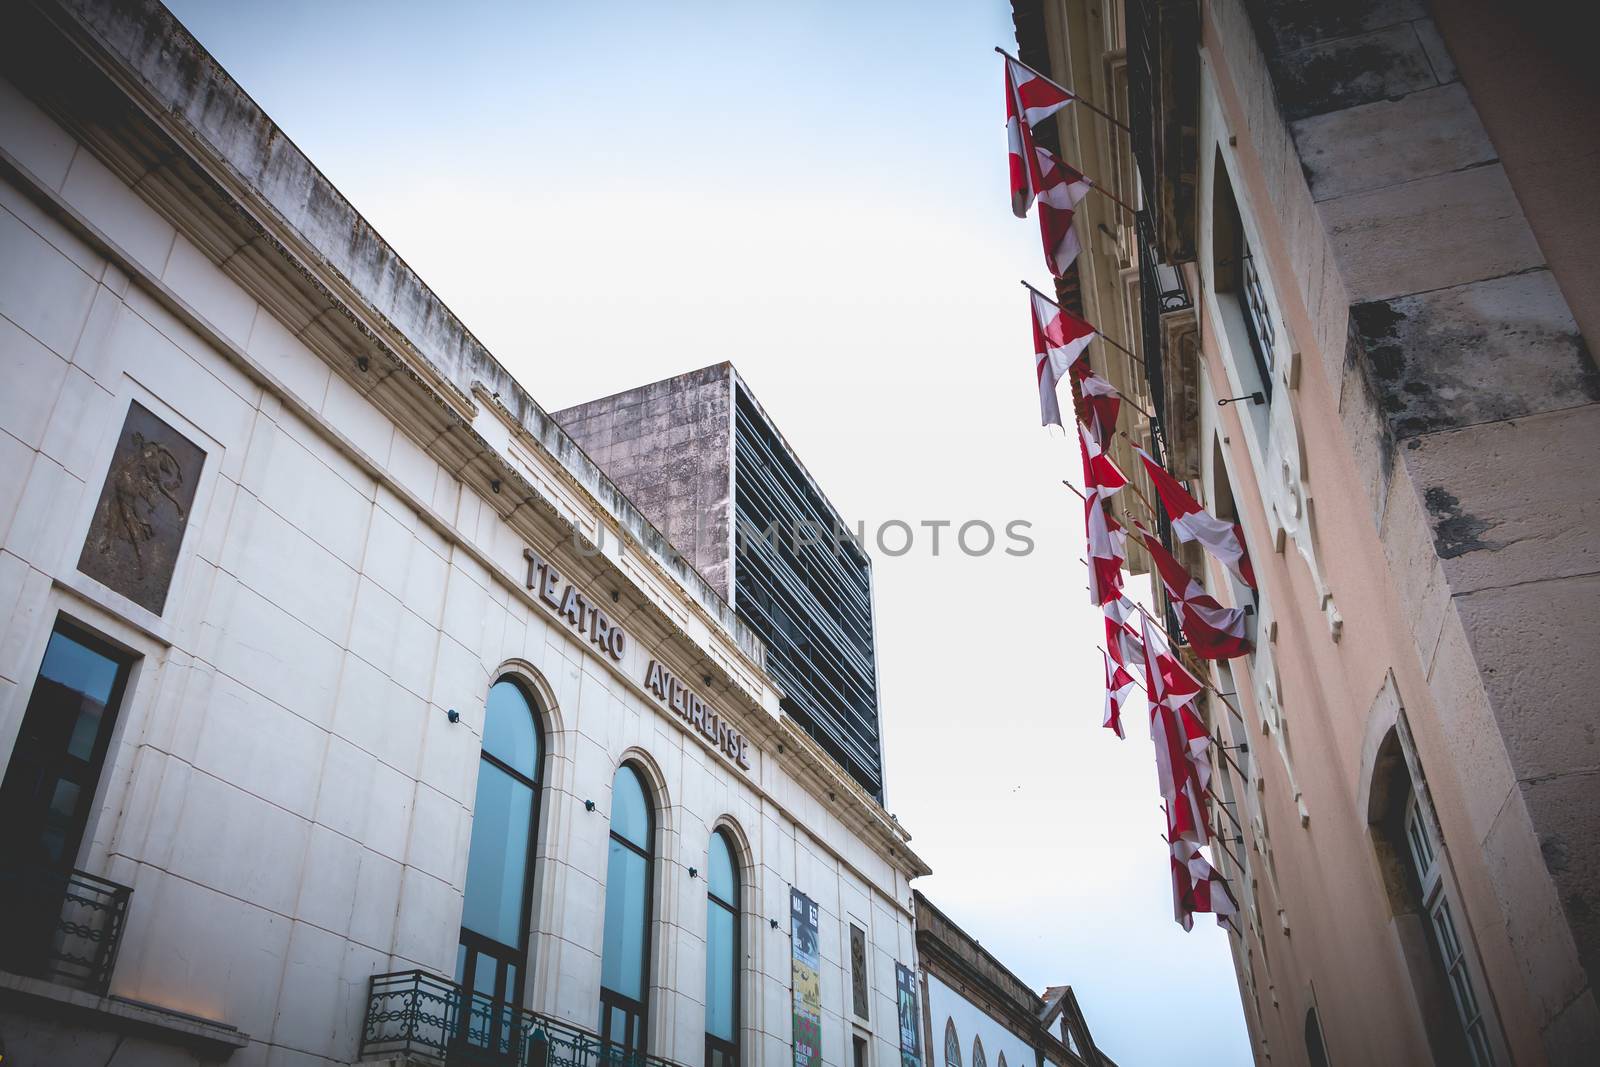 Aveiro, Portugal - May 7, 2018: Architecture detail of Aveirense theater in the historic city center on a spring day